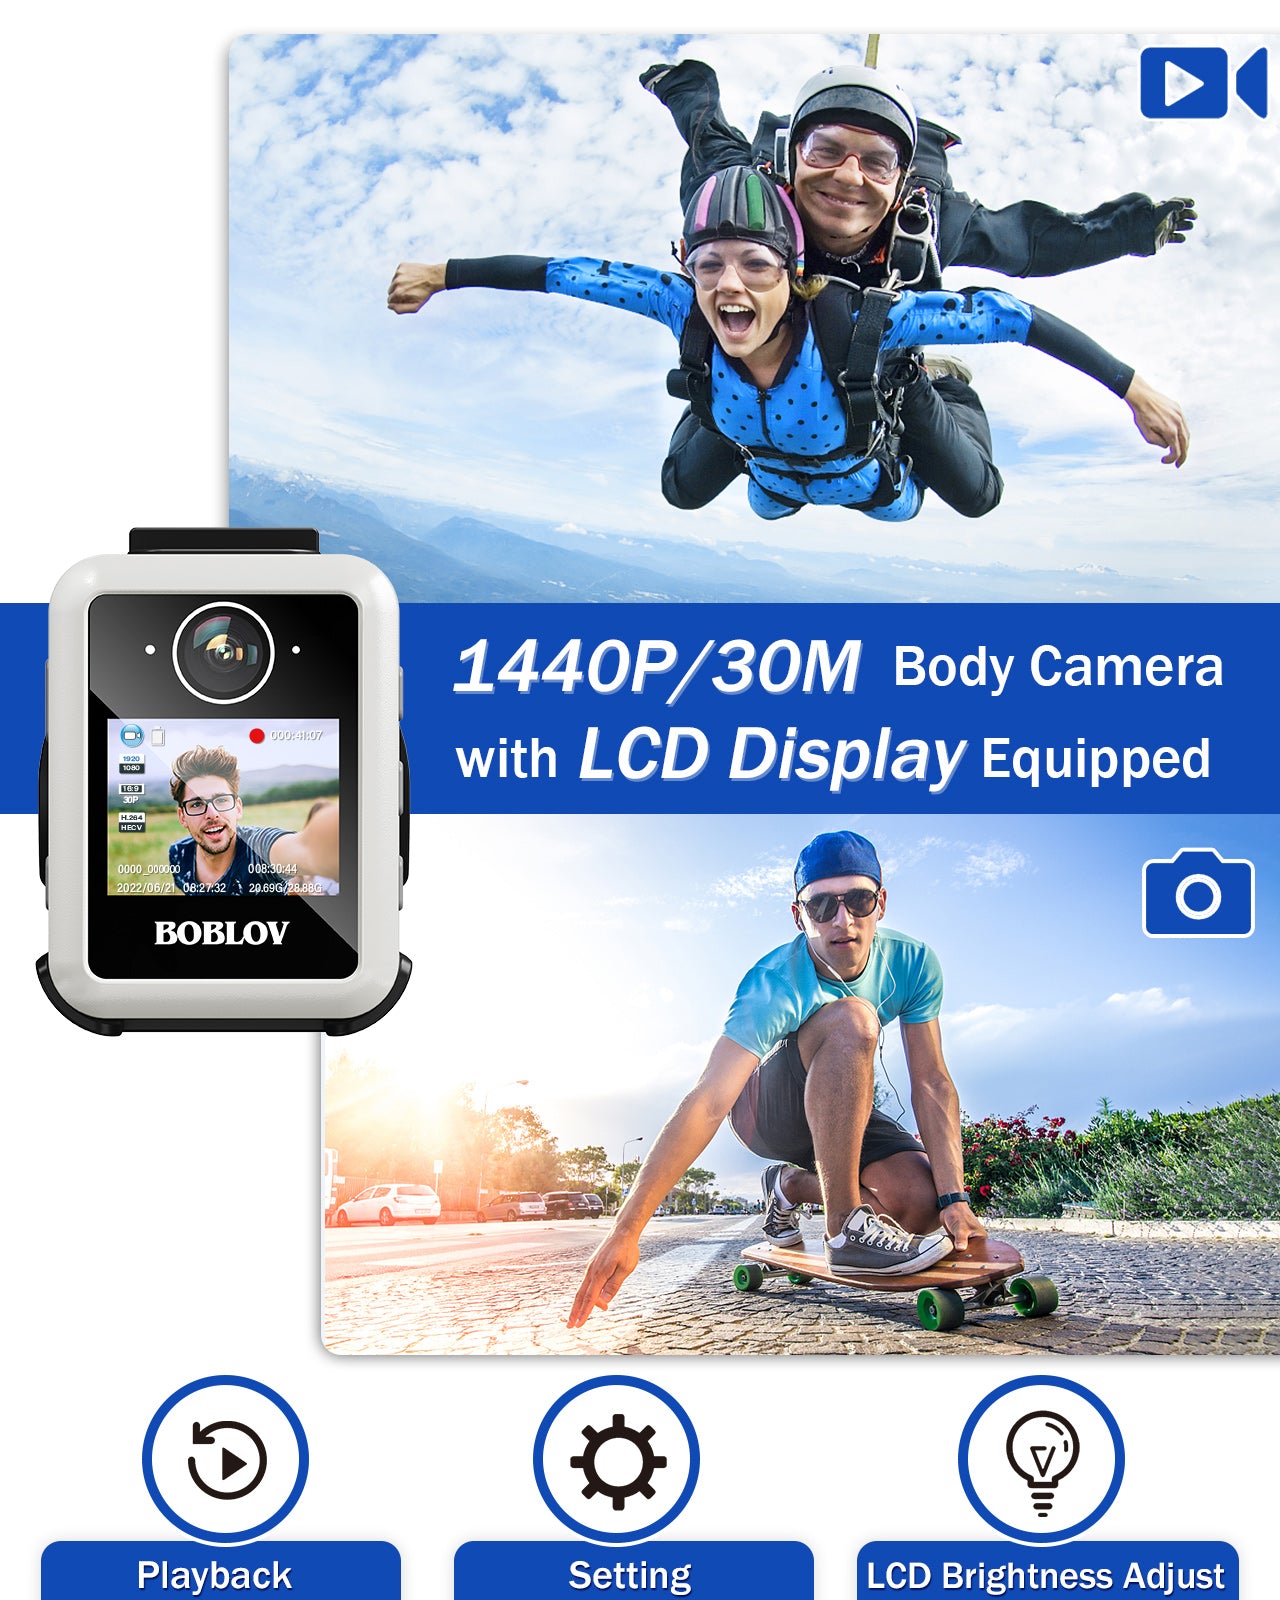 BOBLOV X2 Body Camera with 1440P resolution and LCD Display3